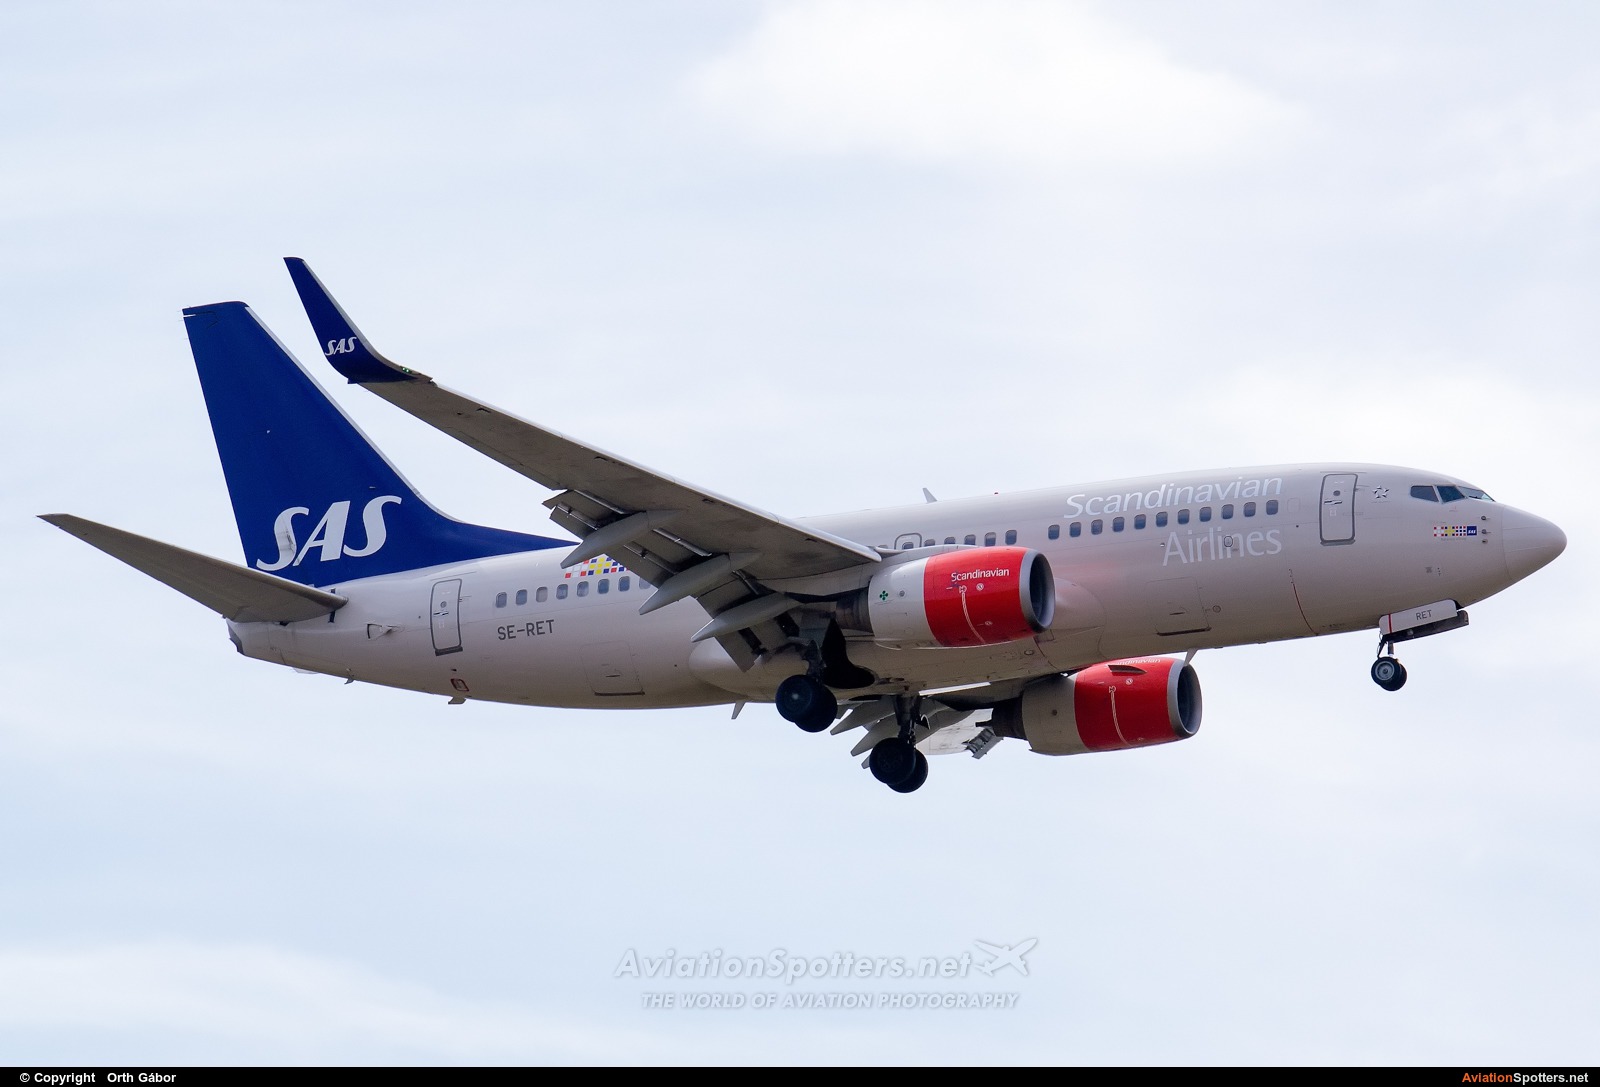 SAS - Scandinavian Airlines  -  737-700  (SE-RET) By Orth Gábor (Roodkop)